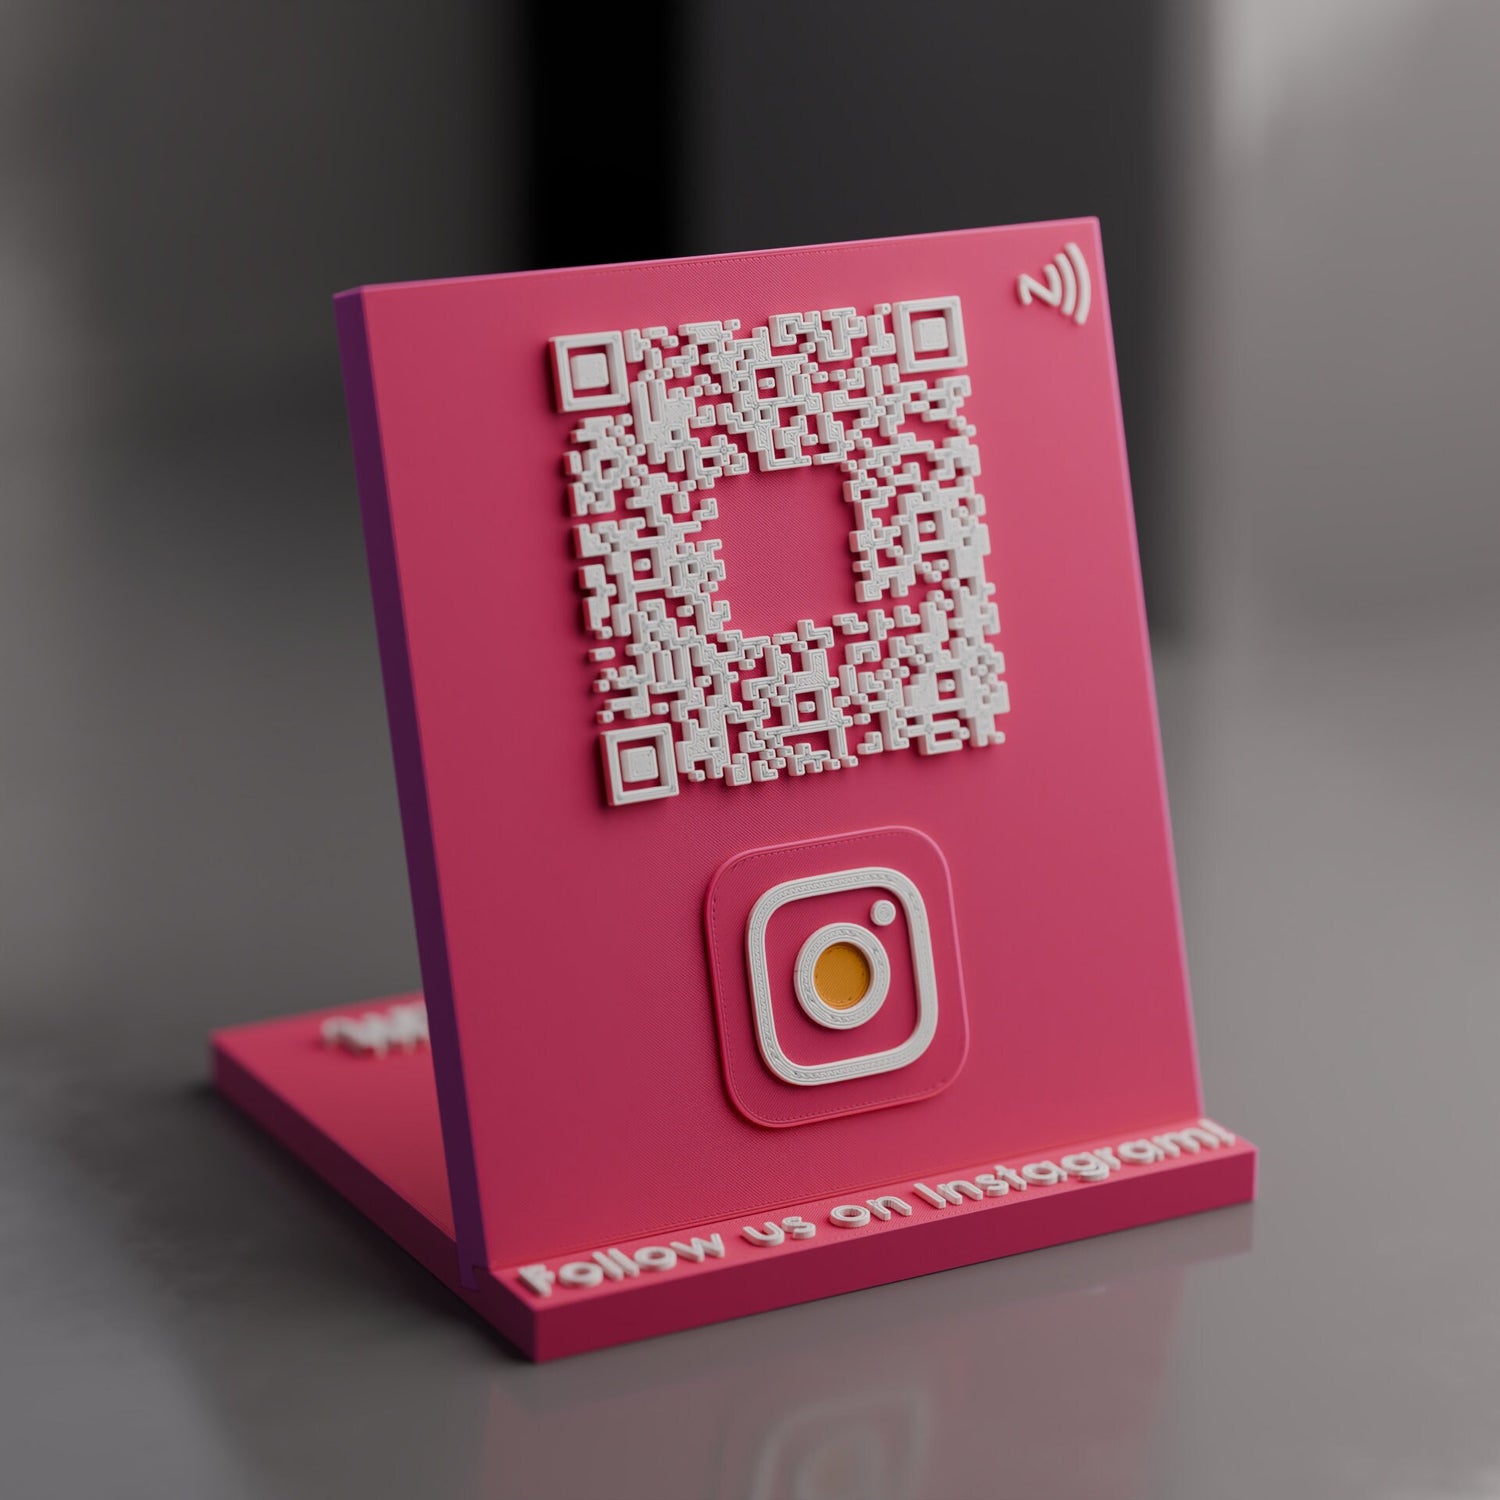 Insatgram Qr Code Stand with NFC Chip - Advertise social medias, and market your brand better.